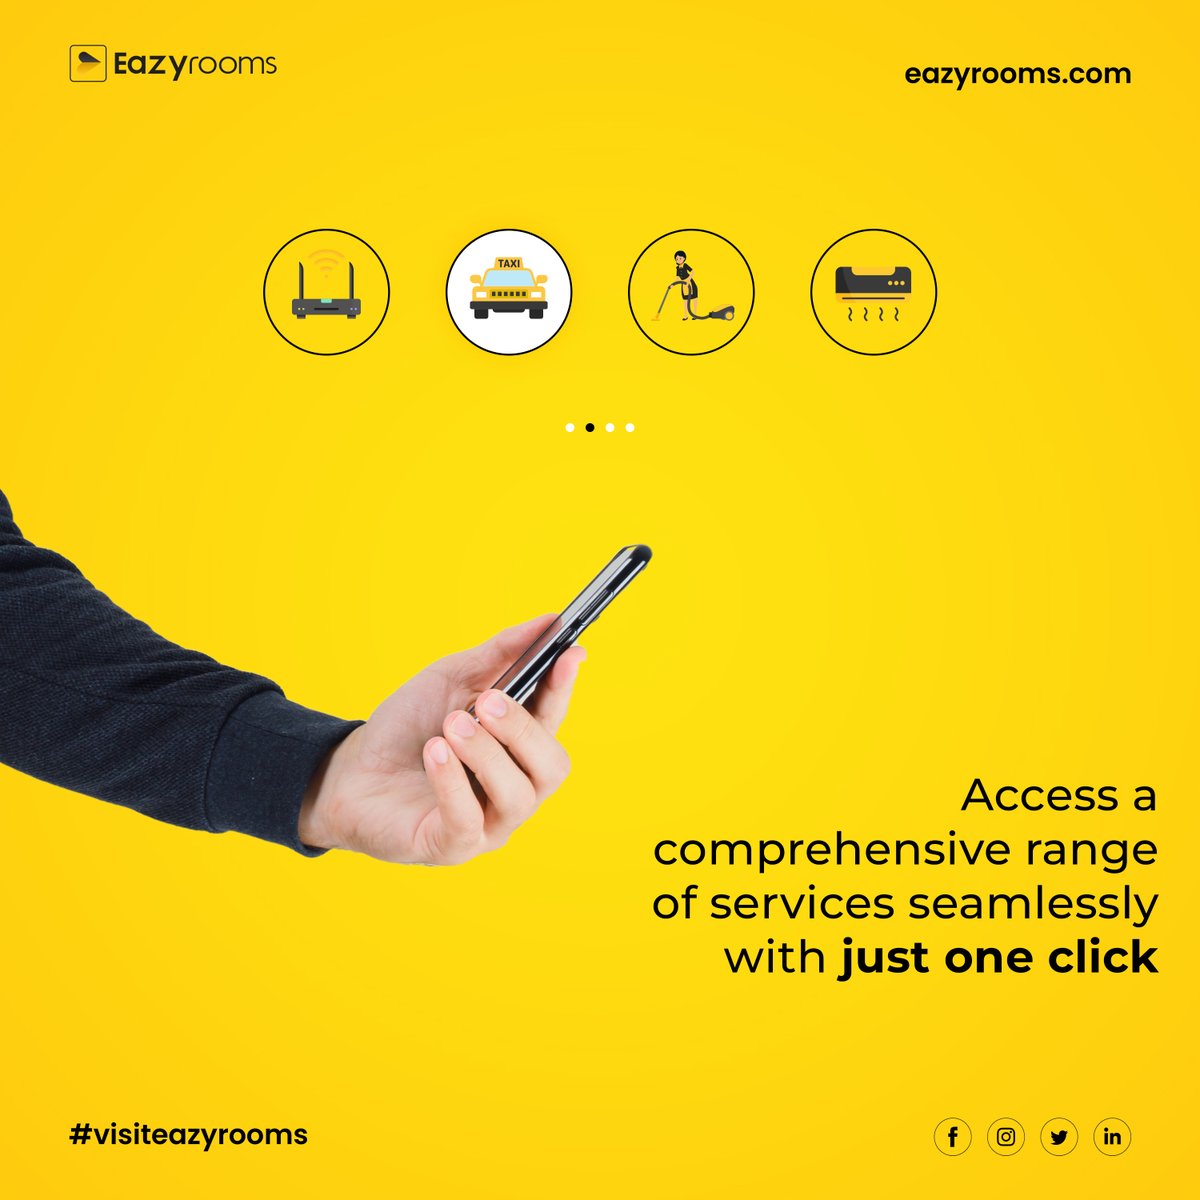 Accessing a comprehensive range of hotel services with just one click is a game-changing concept in today's fast-paced world. 
.
.
.
.
.
#Eazyrooms #hotelguests #hotelowner #hotelownership #hotelgrowth #satisfyguests #happyguests #hotelautomation #hotelmanagement #oneclickaway